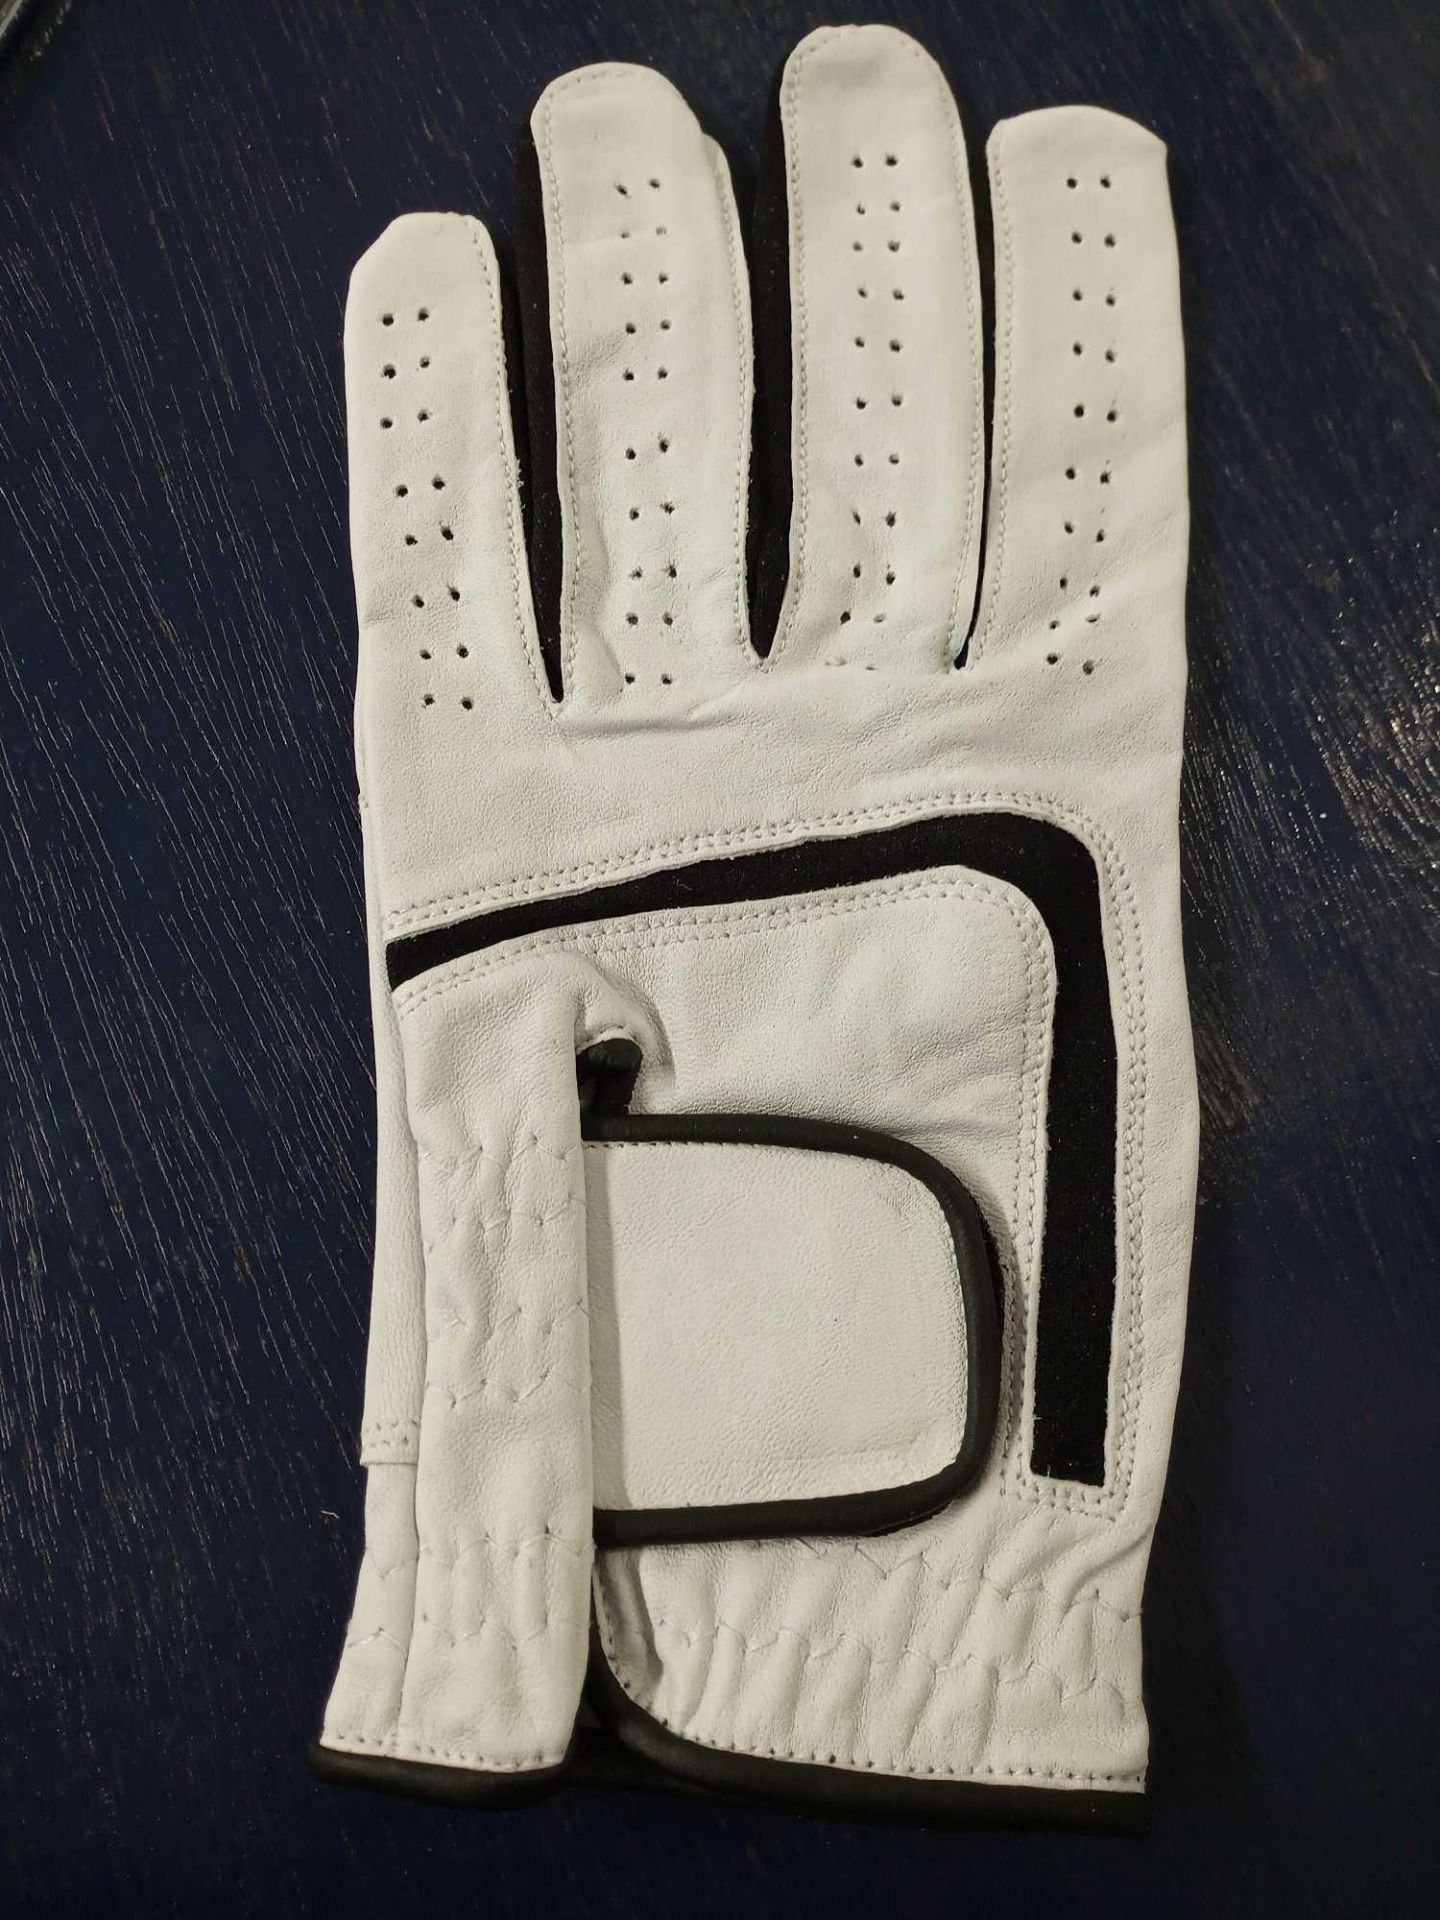 Leather White & Black Golf Glove Xl(Appraisals Available Upon Request) (Pictures Are For Illustratio - Image 2 of 2